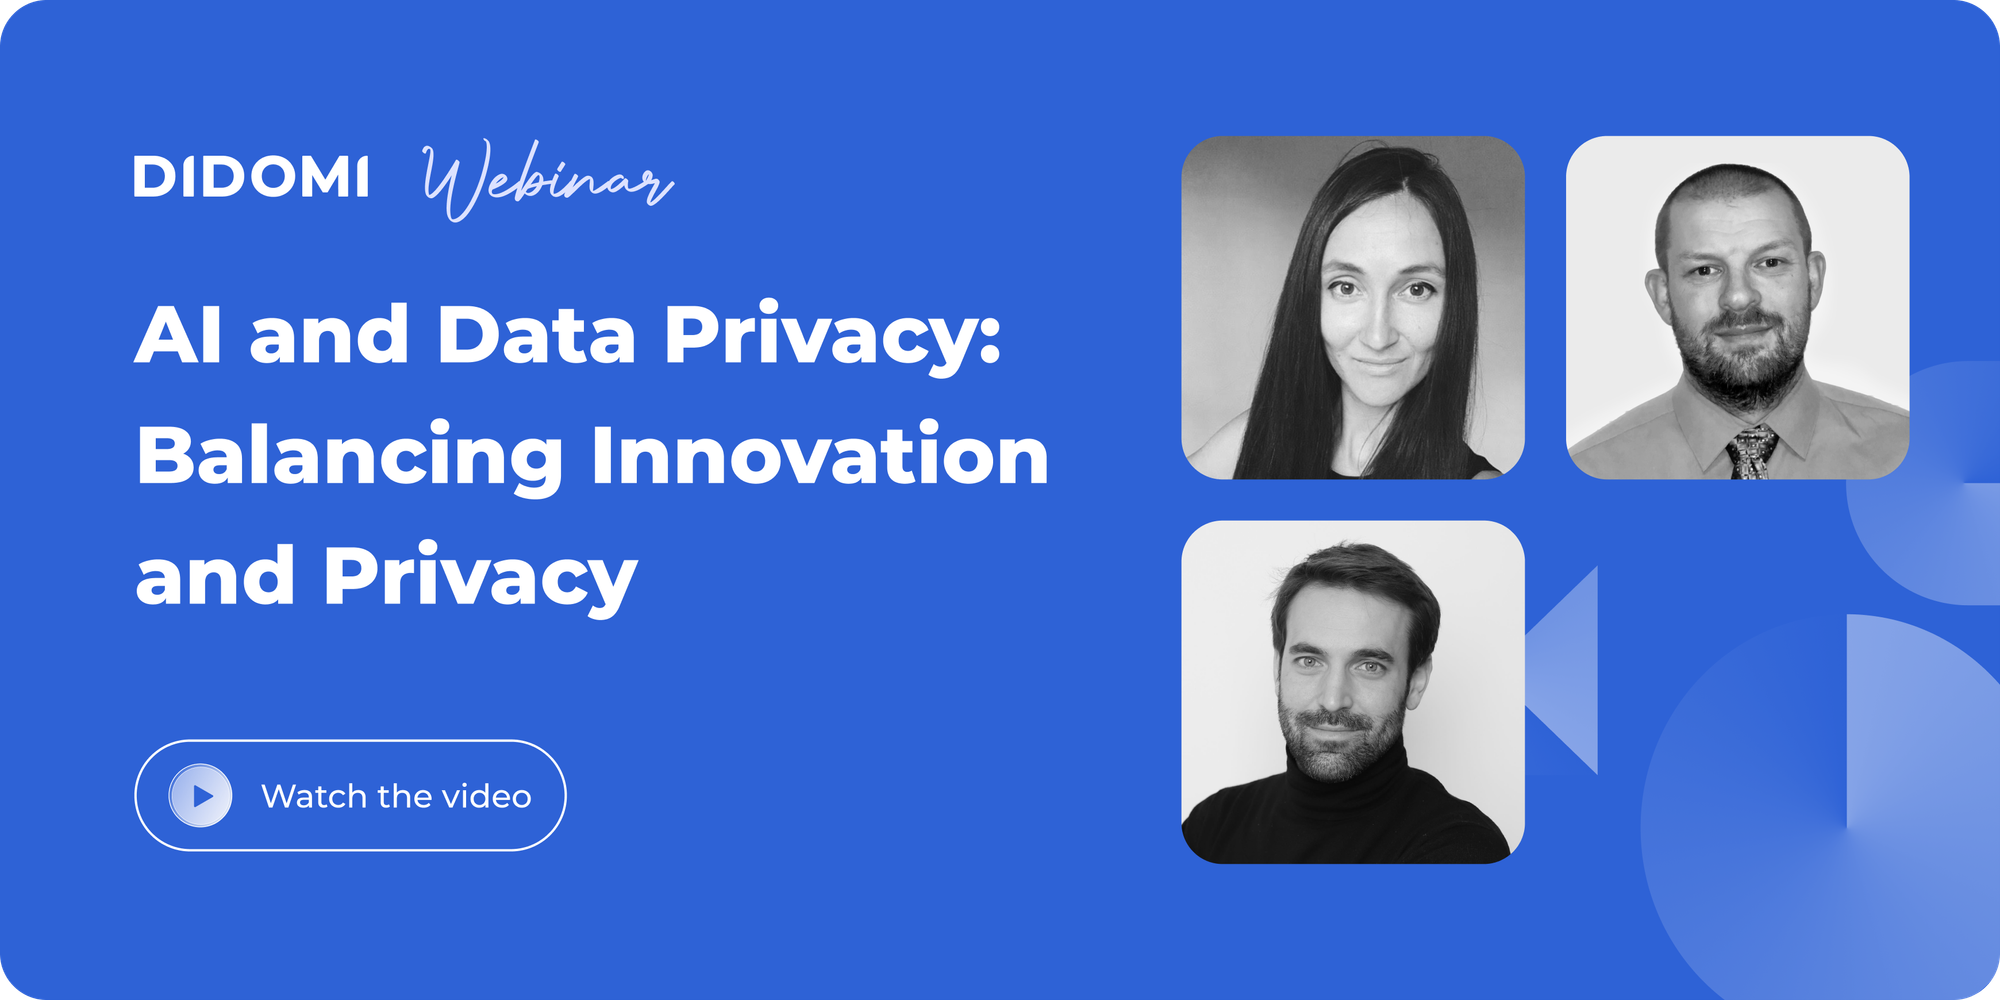 Image displaying the speakers from the webinar, along with the Didomi logo, the title "AI and data privacy: Balancing innovation and Privacy", and a button "Watch the video"